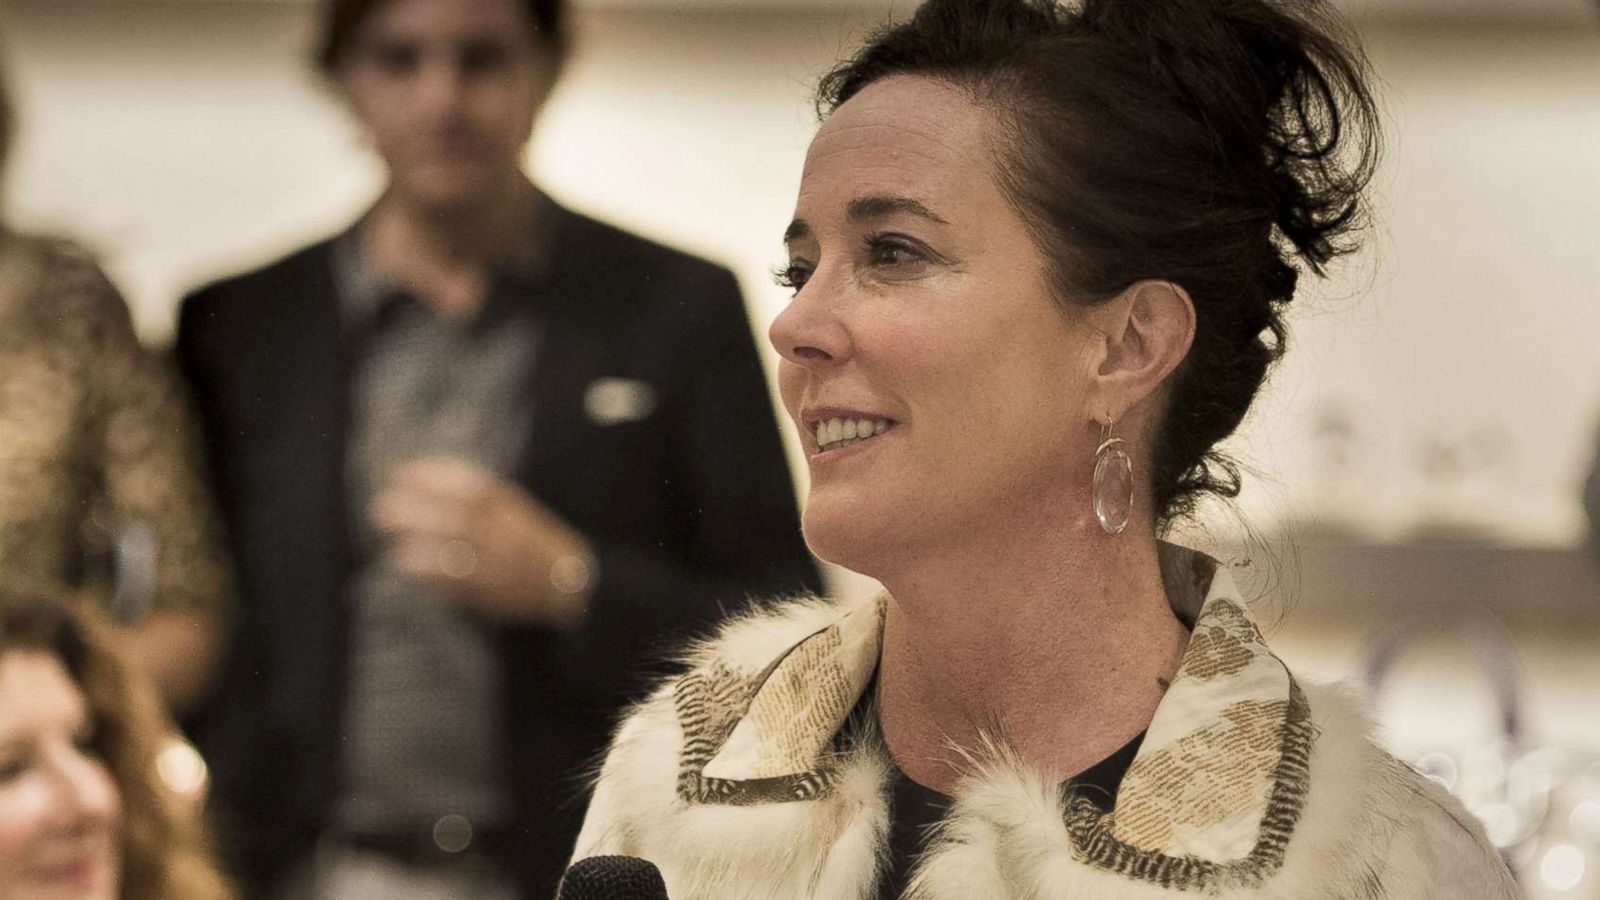 Kate Spade 'sounded happy' before her suicide: How depression can be so  hidden and what loved ones can do - Good Morning America